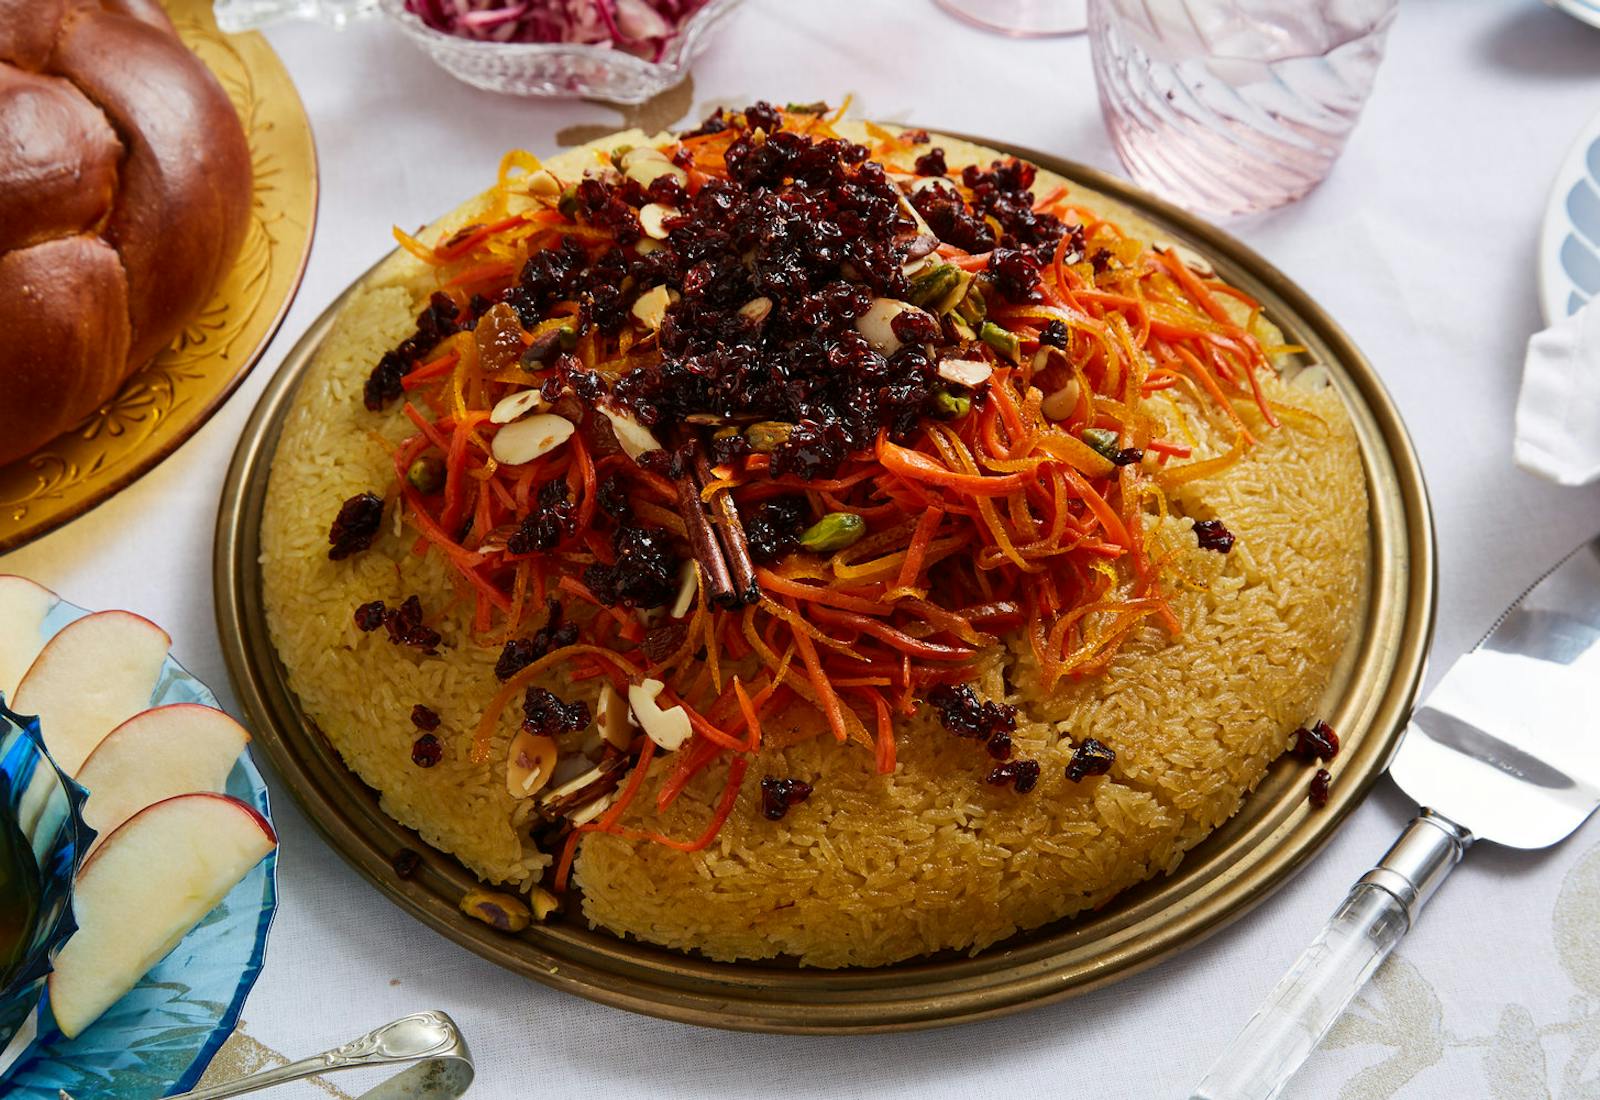 Crispy rice tahdig with caramelized fruit and nuts alongside challah, apples and honey.